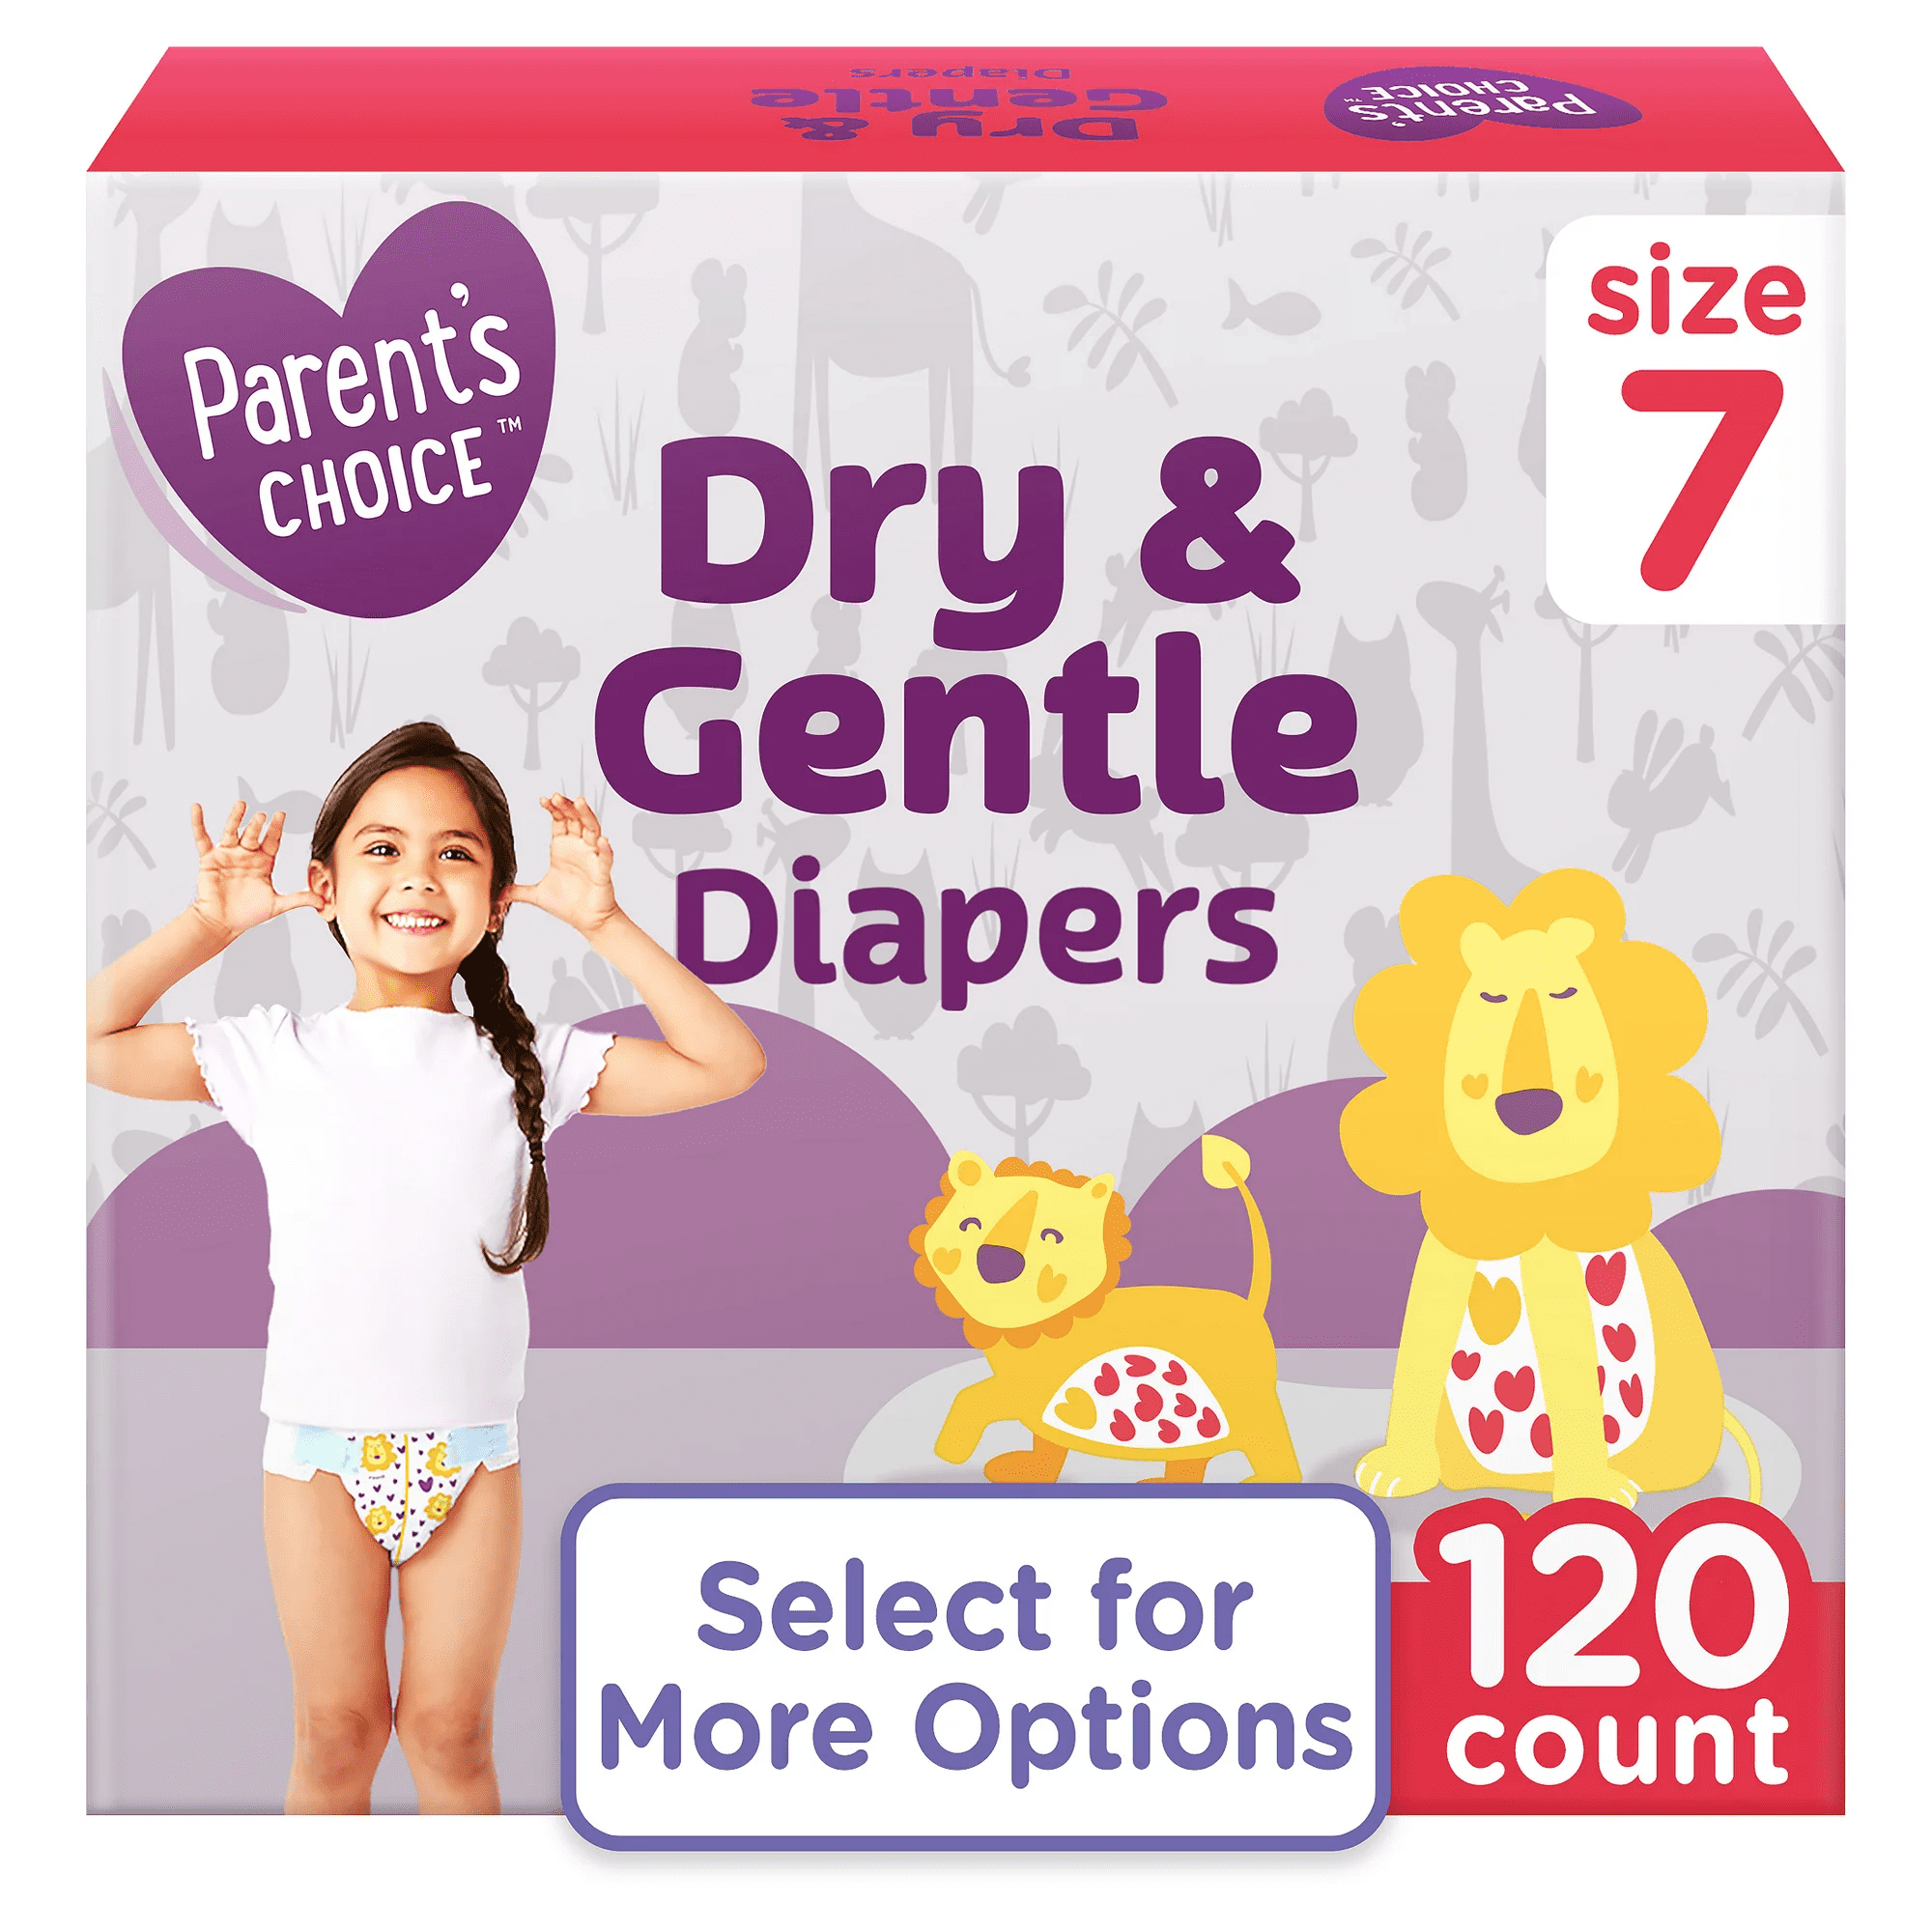 Parent's Choice Dry & Gentle Diapers Size 7, 120 Count 